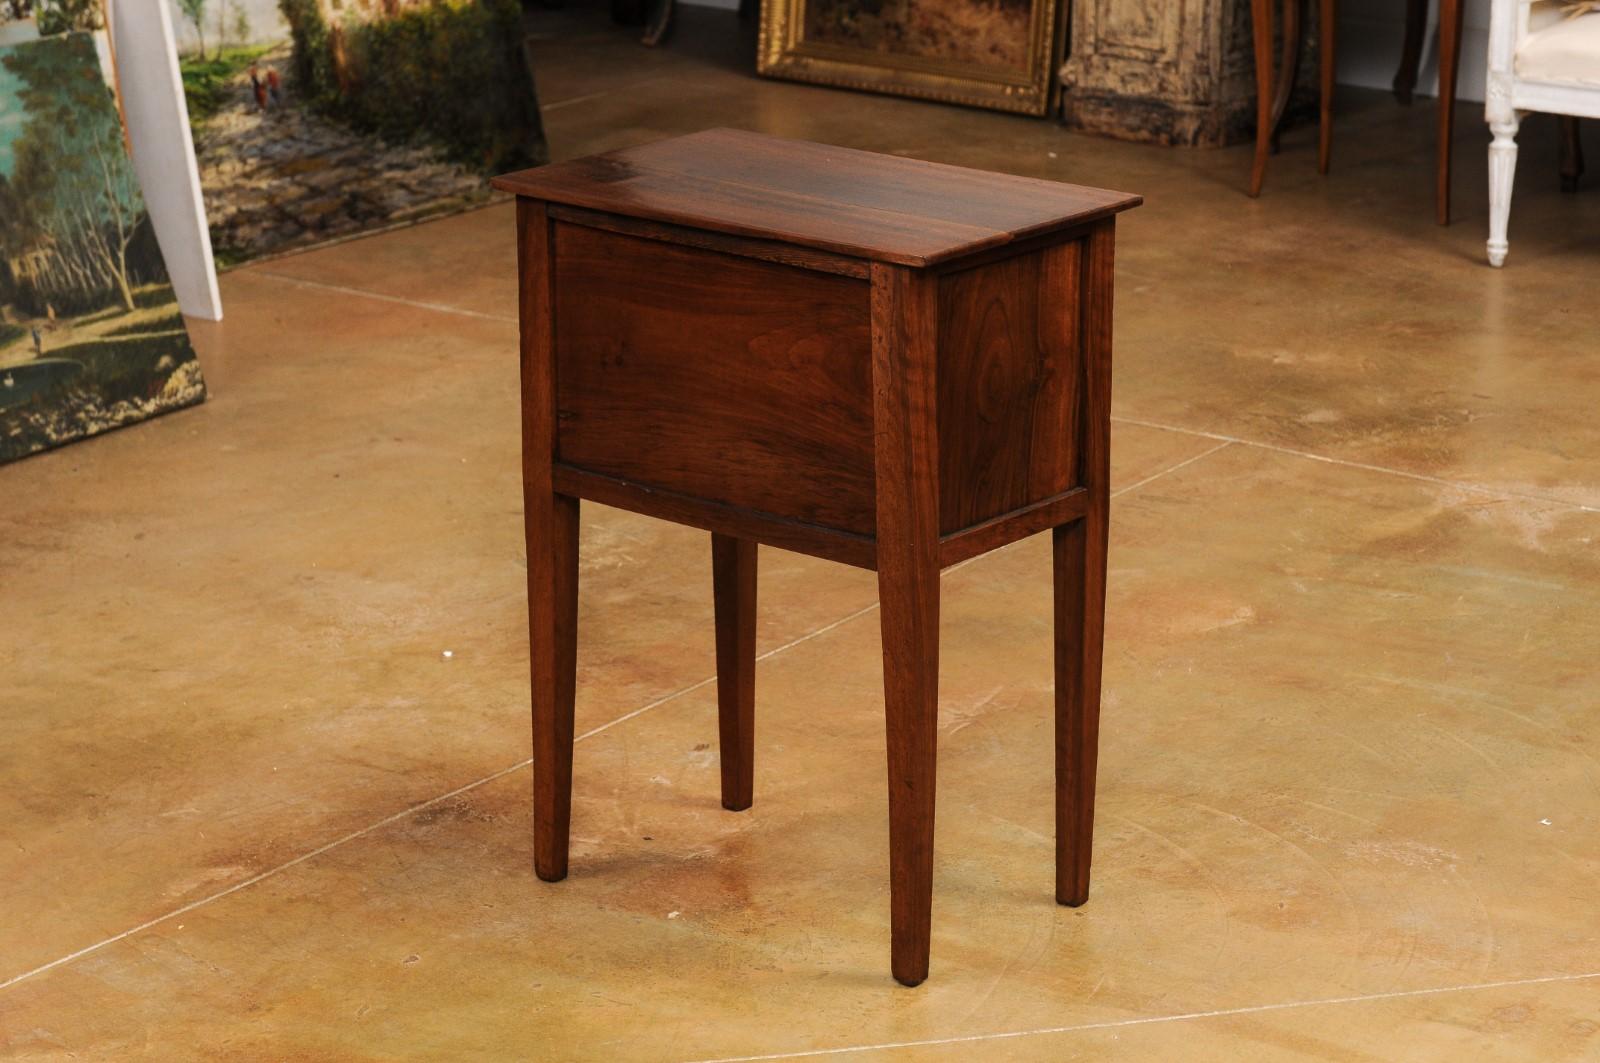 Italian Directoire 19th Century Walnut Bedside Table with Two Veneered Drawers For Sale 5